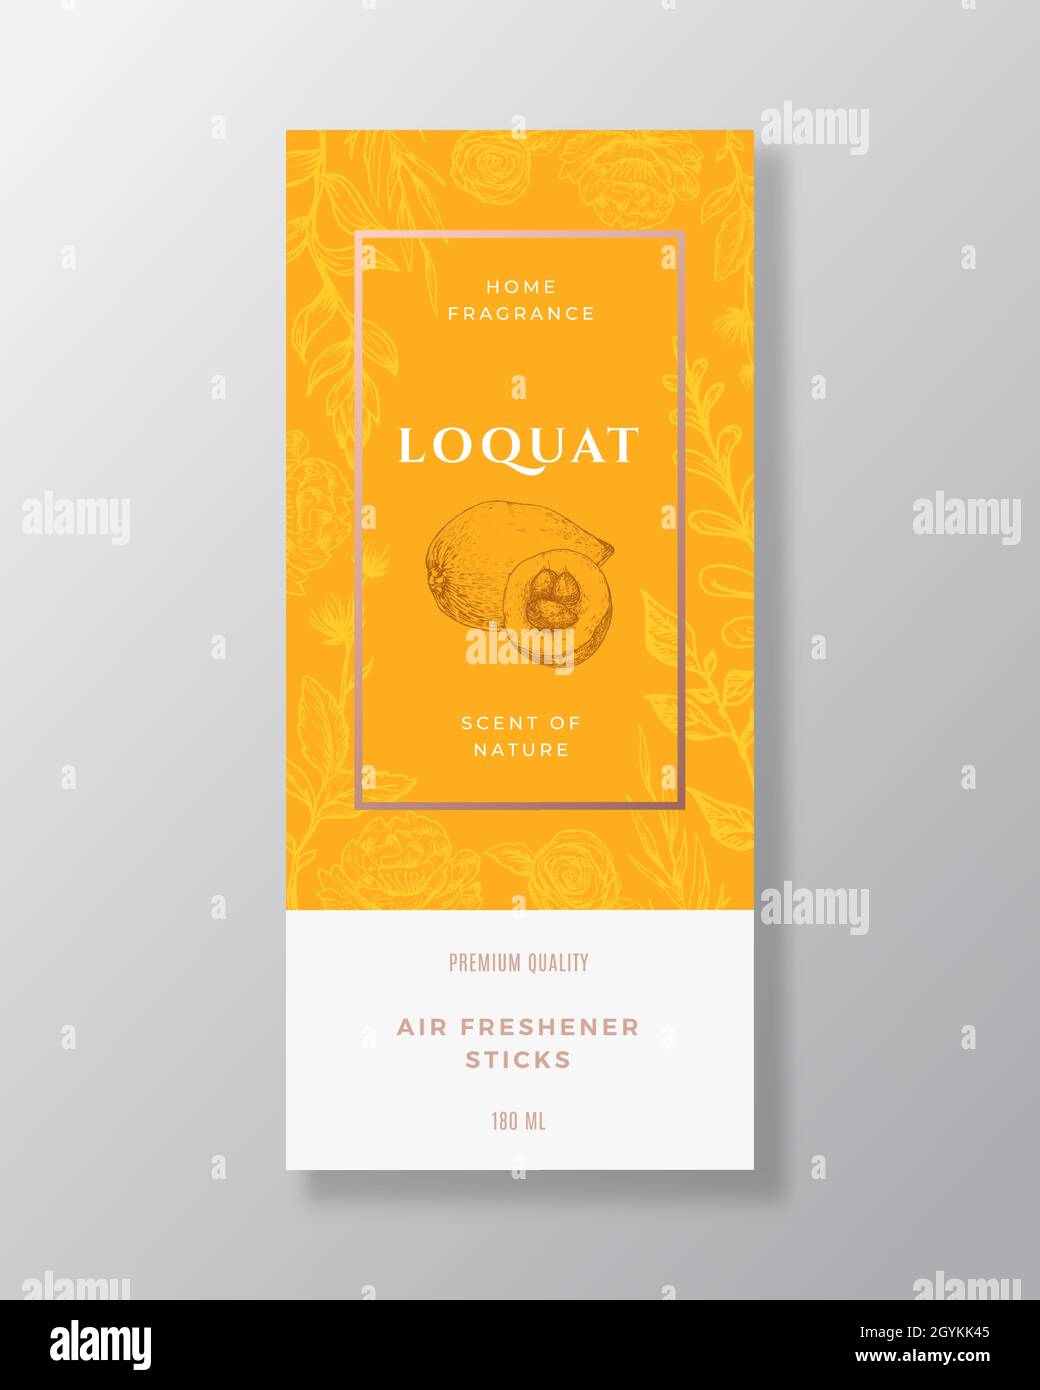 Loquat Home Fragrance Abstract Vector Label Template. Hand Drawn Sketch Flowers, Leaves Background and Retro Typography. Premium Room Perfume Stock Vector